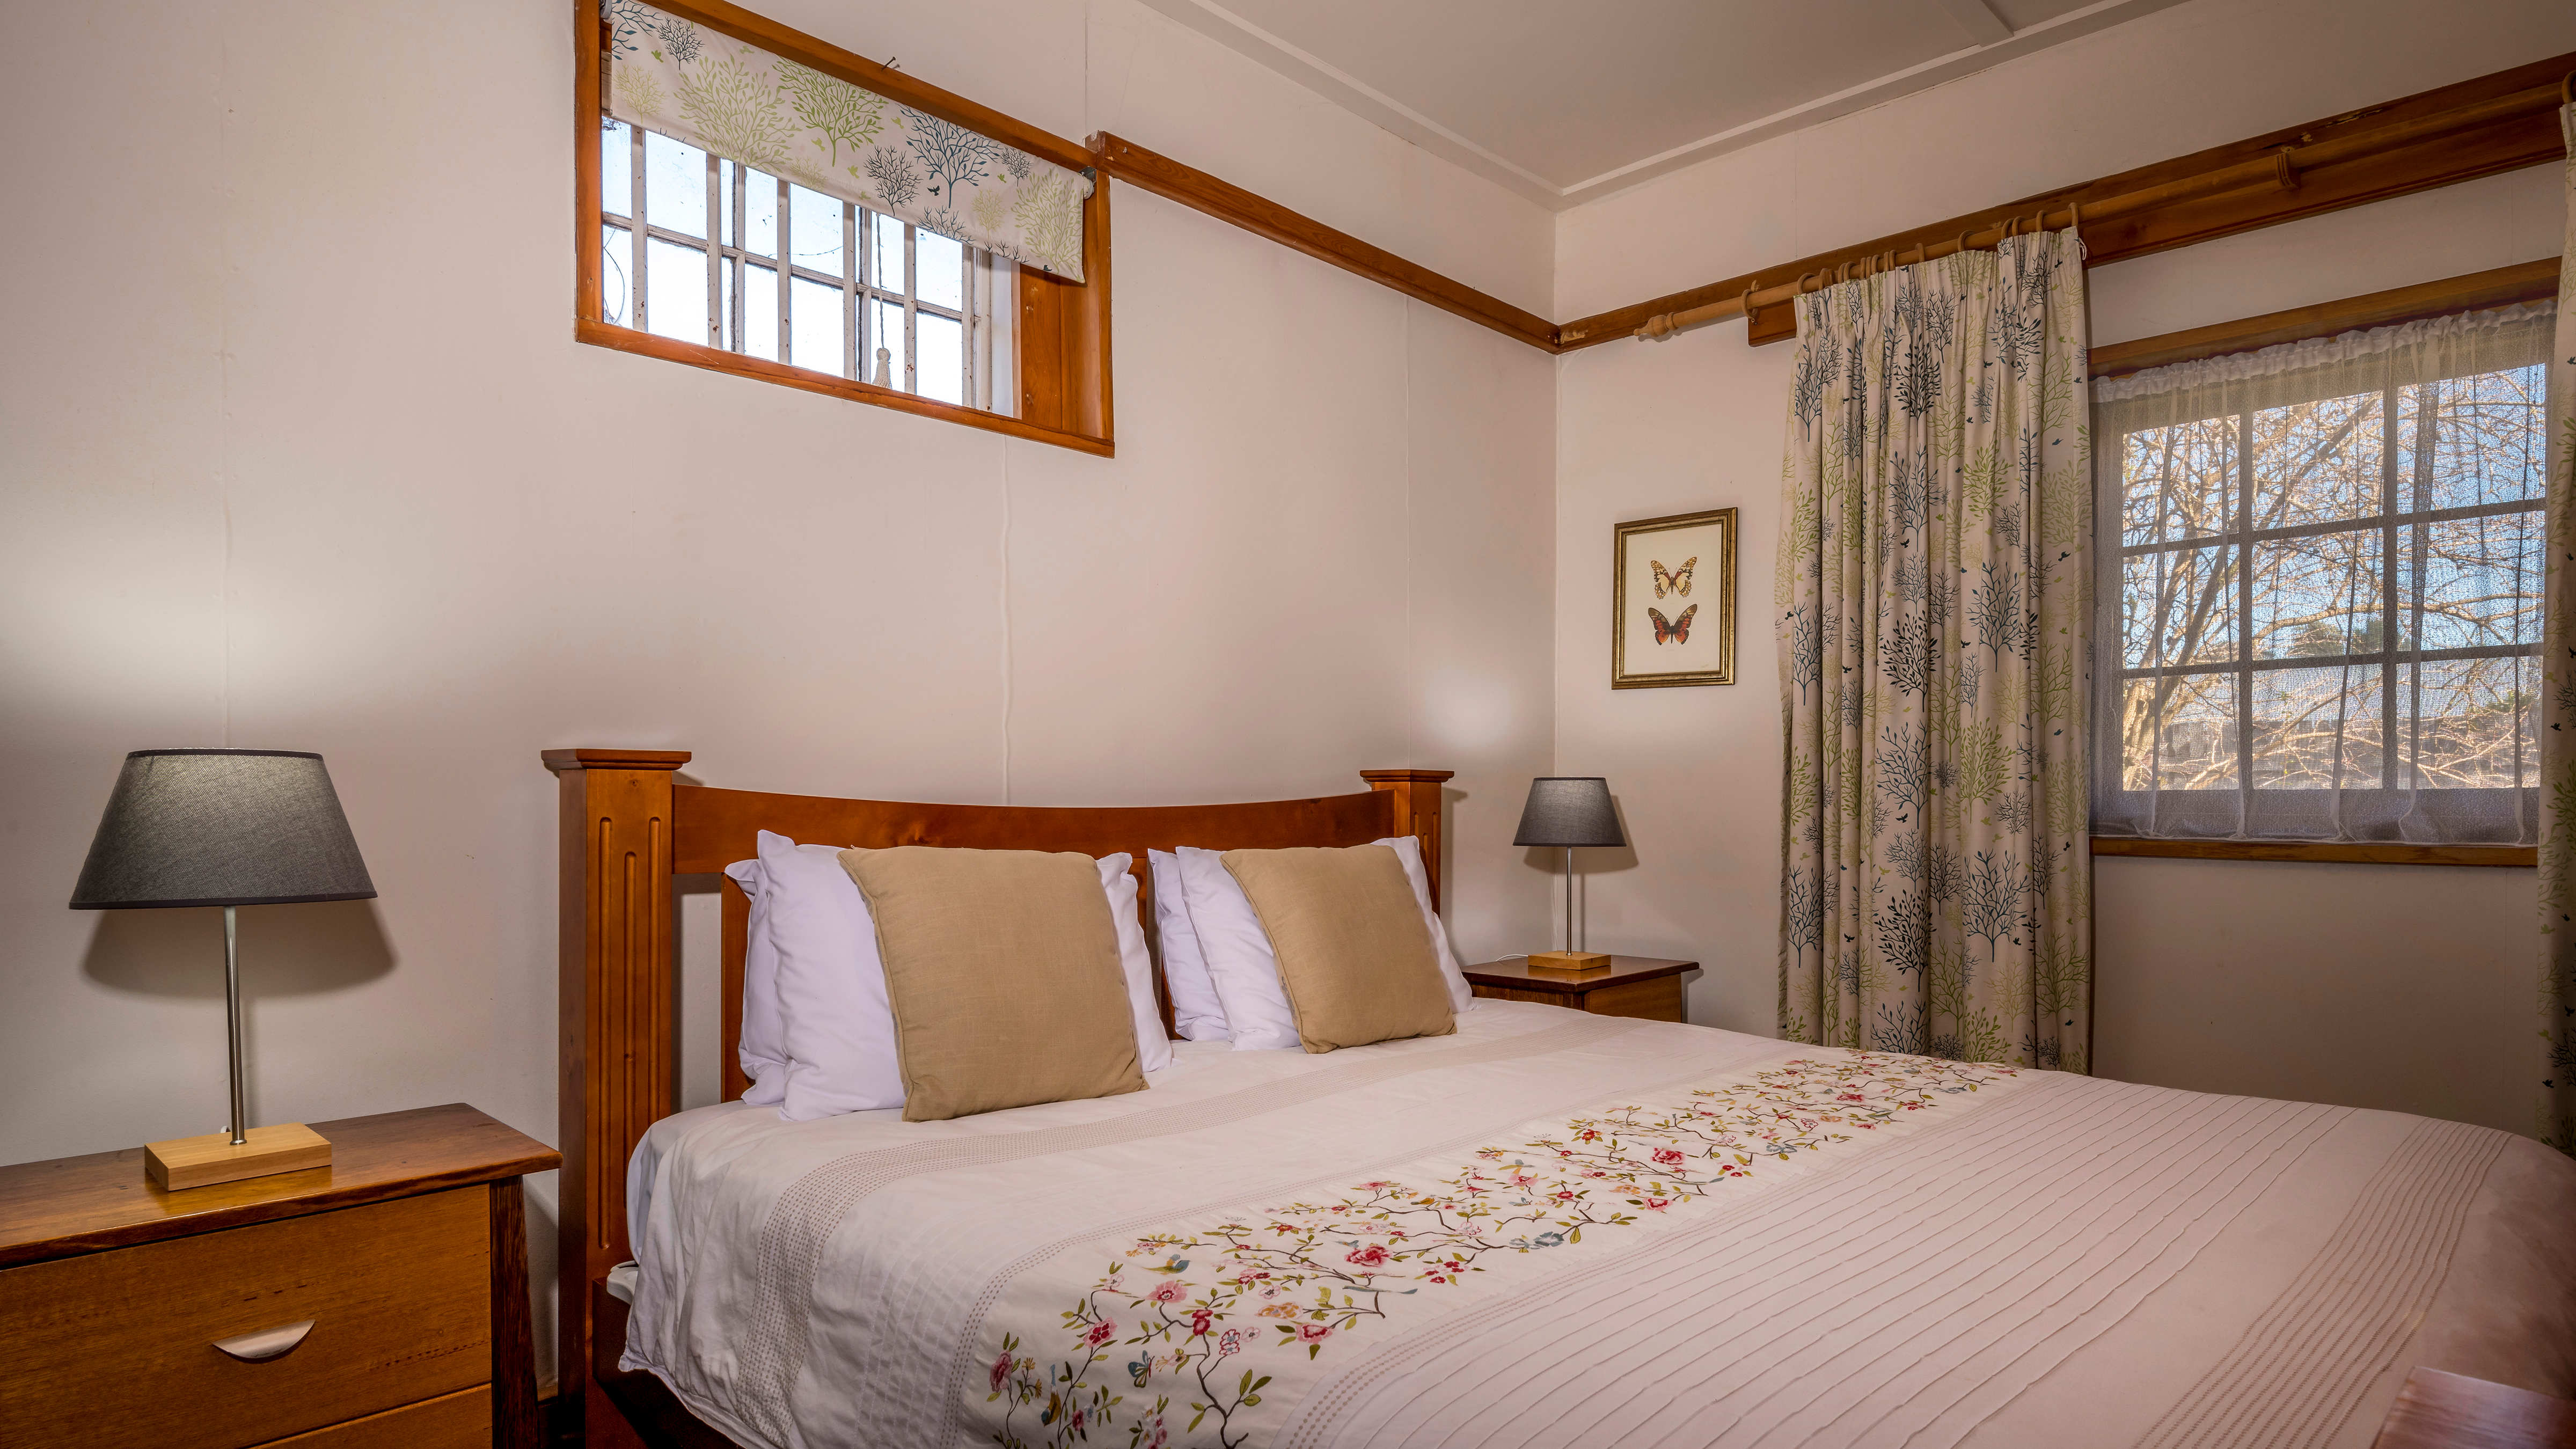 A king size timber bed stands in the middle of the image which has a white and floral patterned quilt cover and two fawn coloured cushions. Two bedside drawer stands have two bedside lamps with grey shades. A small paned window with bars and a blind is above the bedhead and green and blue floral curtains hang beside a second larger window on the far side of the bed. A timber picture rail runs around the room and a butterfly print hangs on the wall. Photo: Rob Burnett.